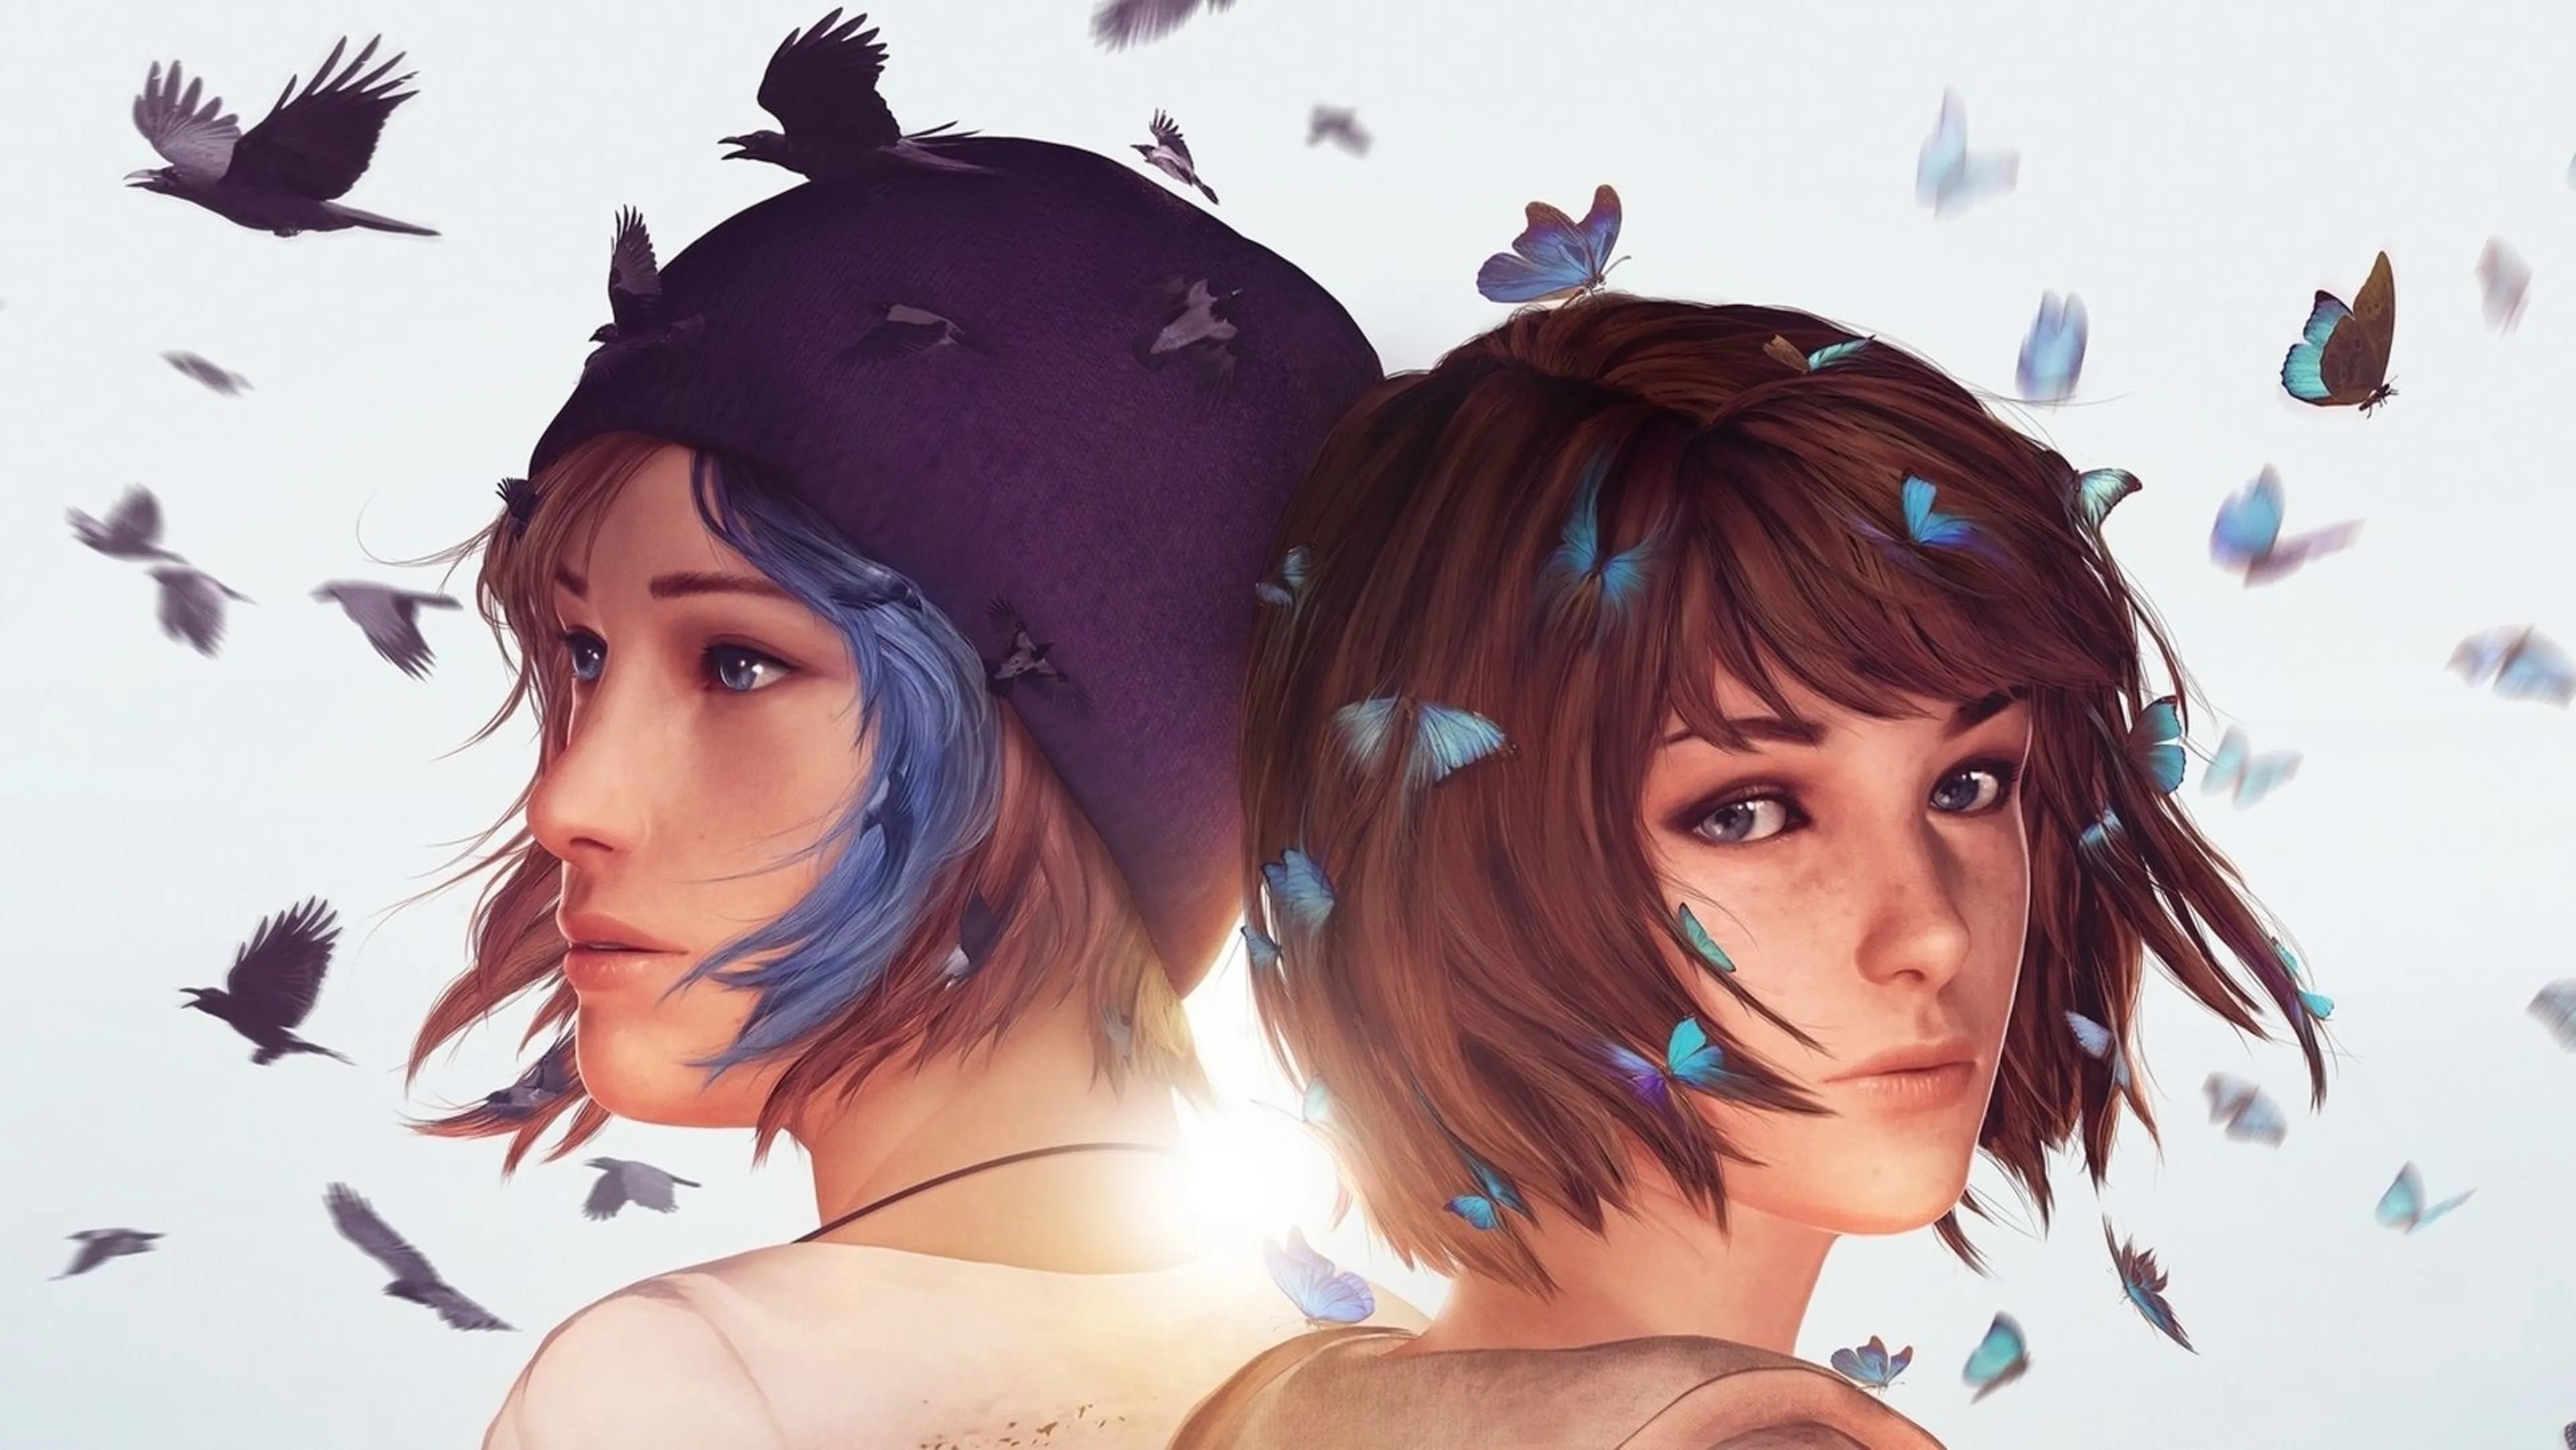 N life being. Лайф ИС Стрендж. Life is Strange Remastered collection. Life is Strange before the Storm Remastered.